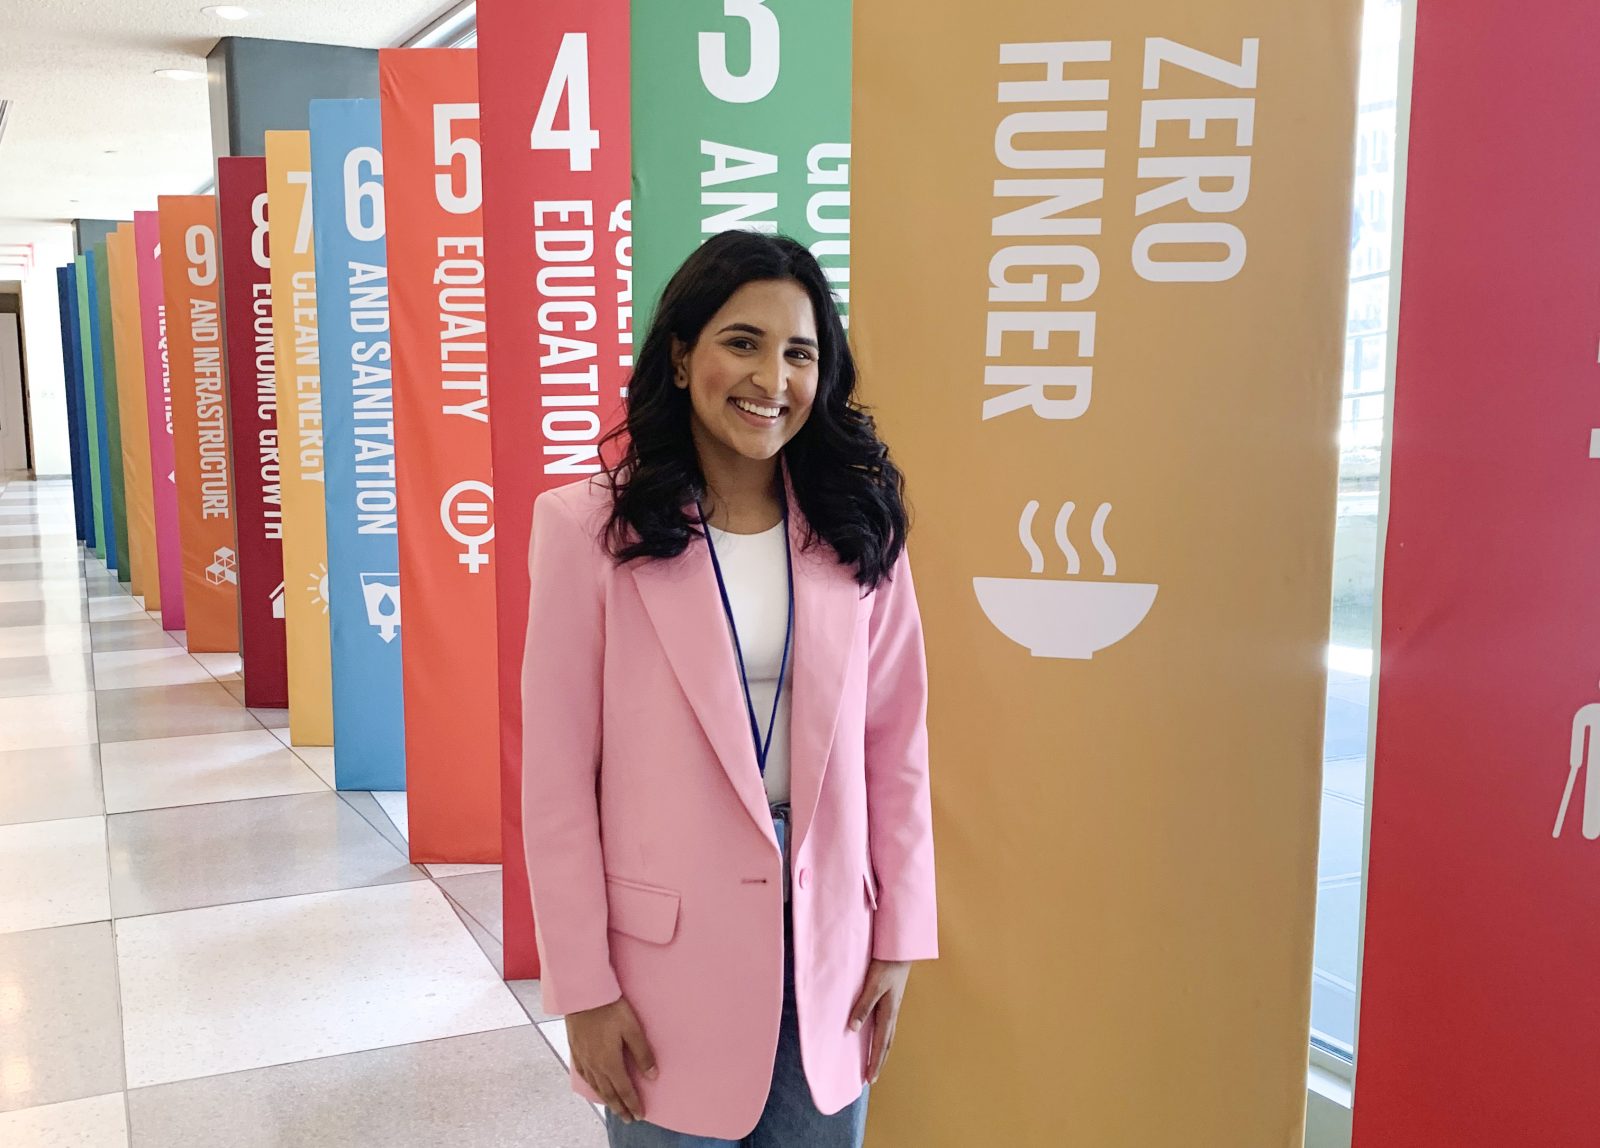 Muskaan Waraich, wearing a pink blazer, stands near a row of banners outlining the UN’s Sustainable Development Goals in a long corridor.